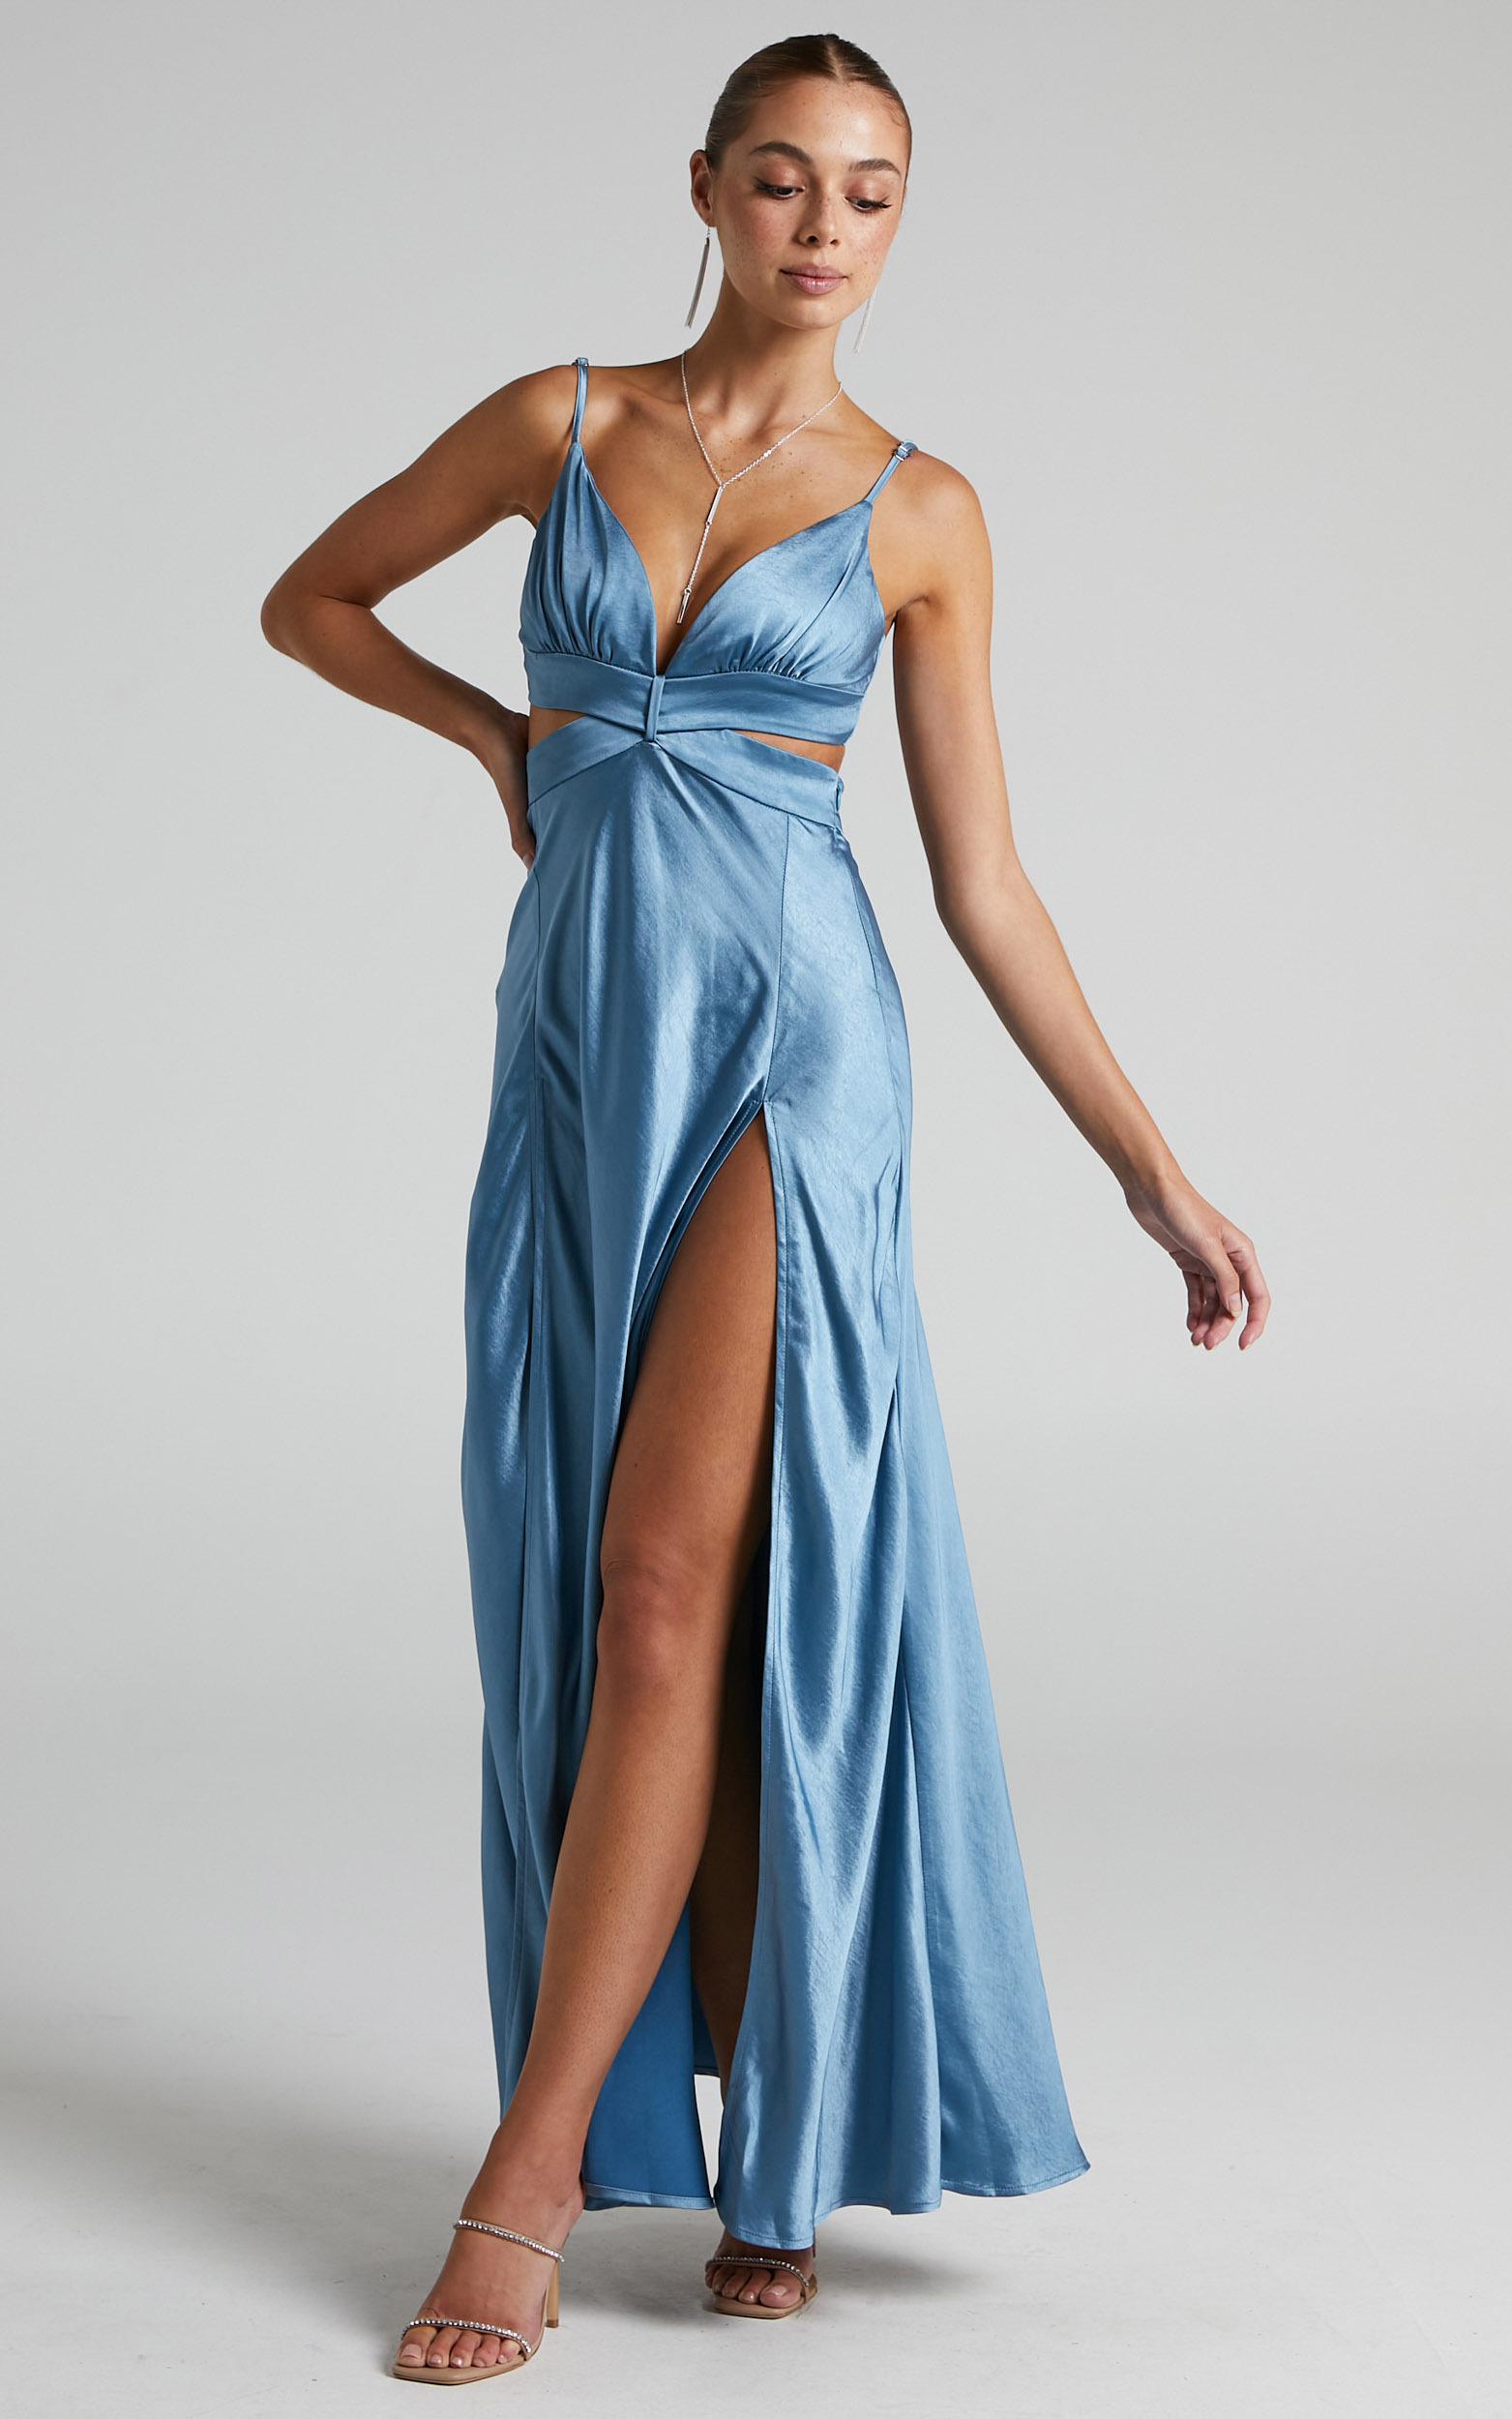 Precious Maxi plunge neck dress in Satin in Steel Blue - 06, BLU1, hi-res image number null